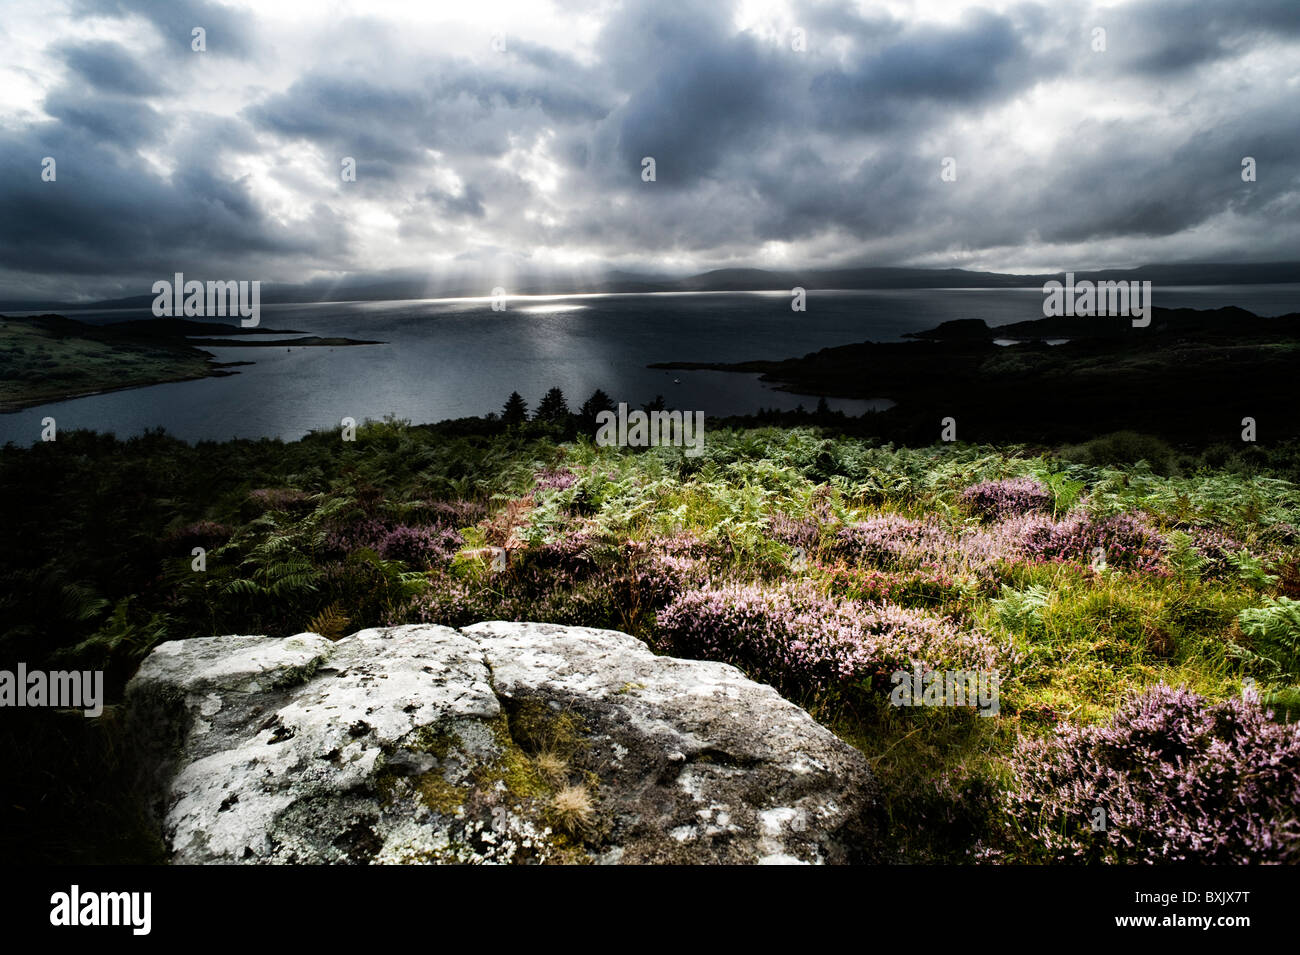 Looking from a rock and heather strewn hilltop over the water to the rain falling from sun-silvered clouds on a distant island. Stock Photo